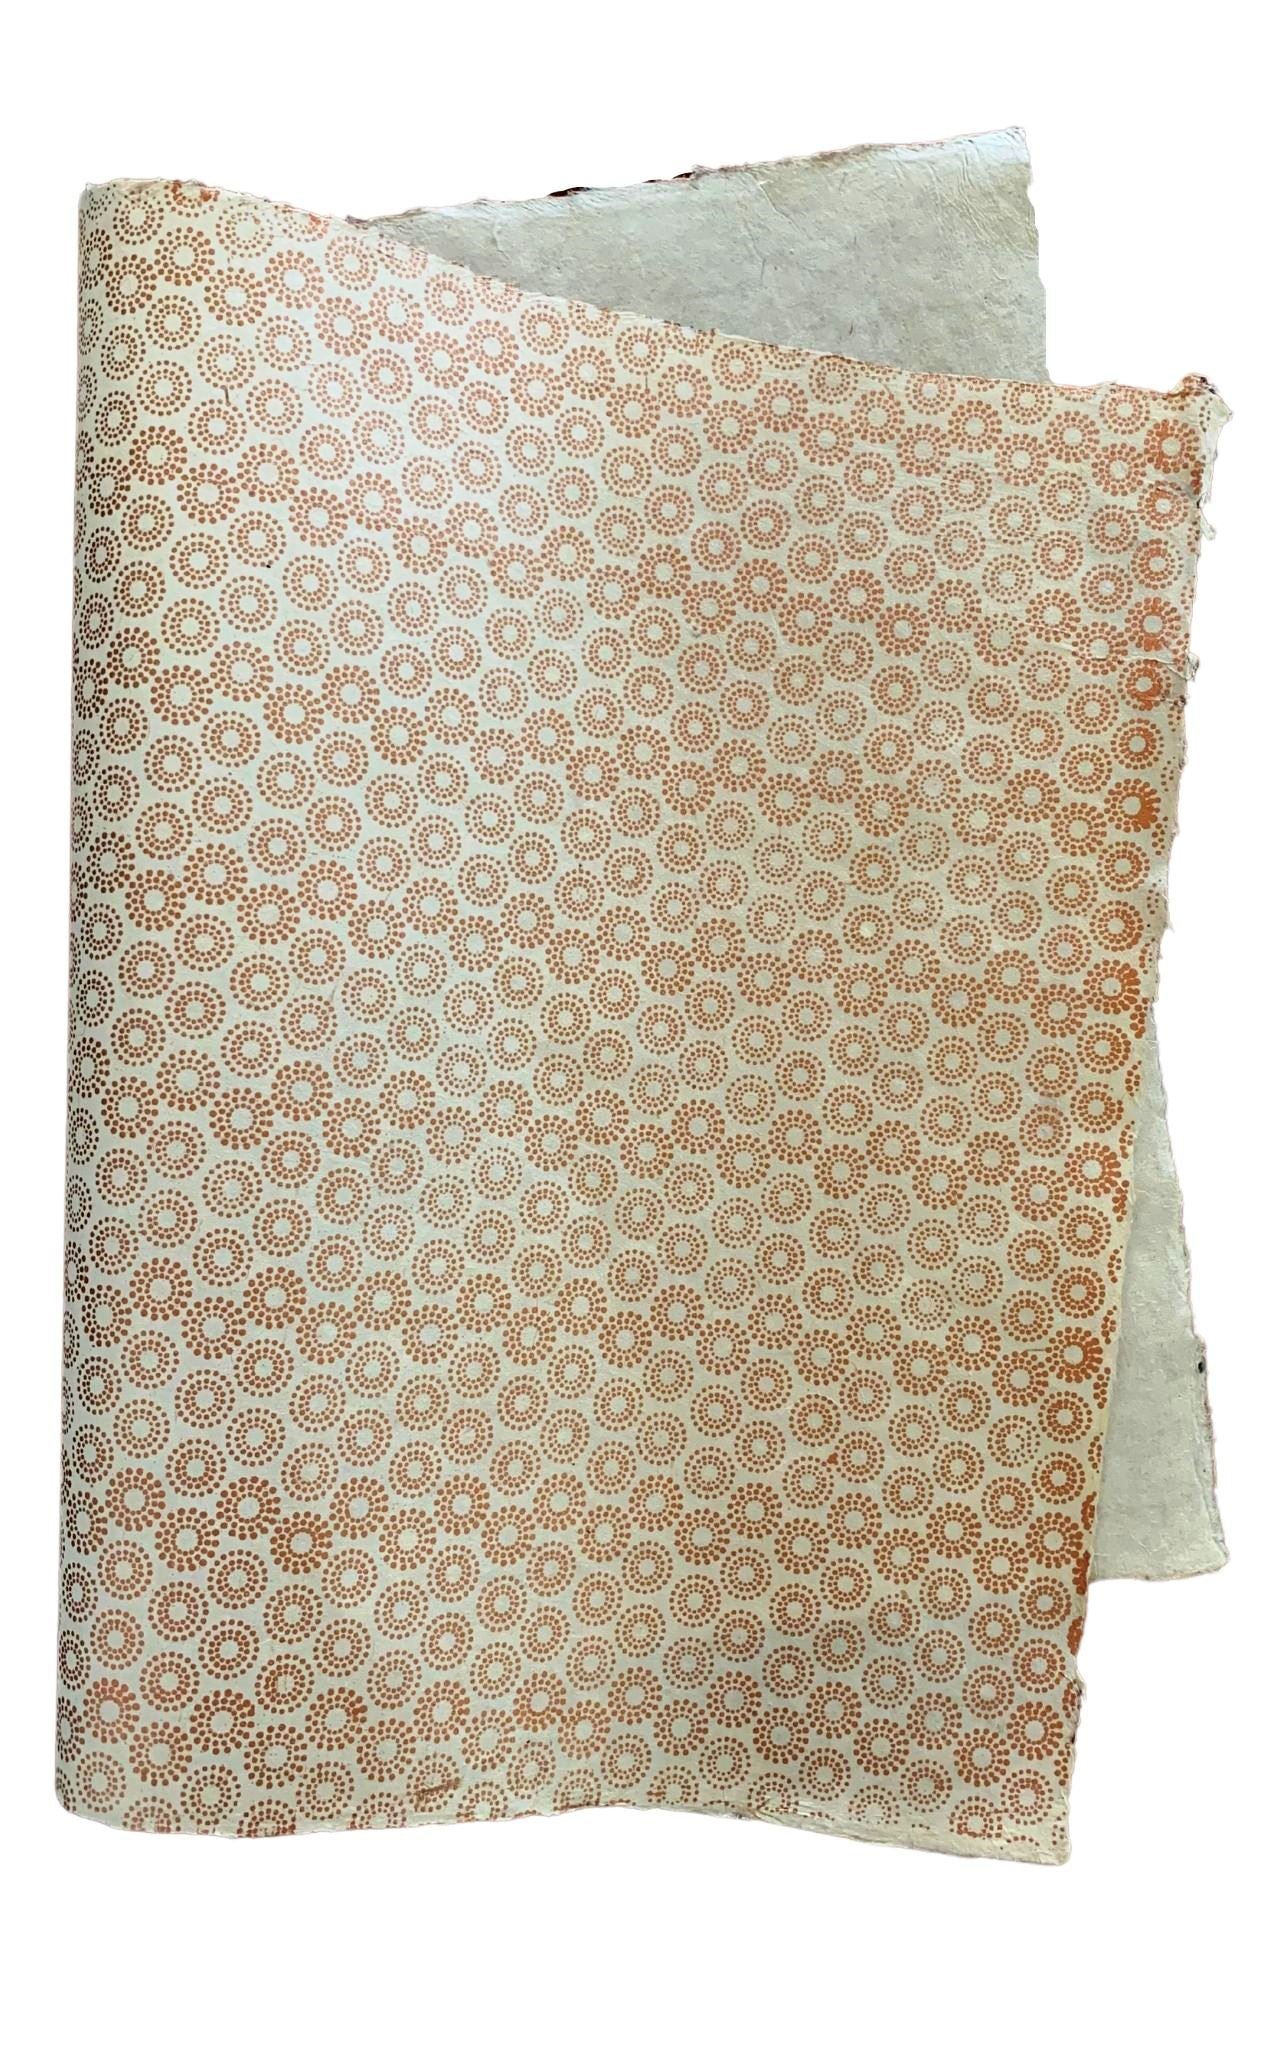 Surya Australia Sustainable Lokta paper Sheets from Nepal - Copper Snowflake